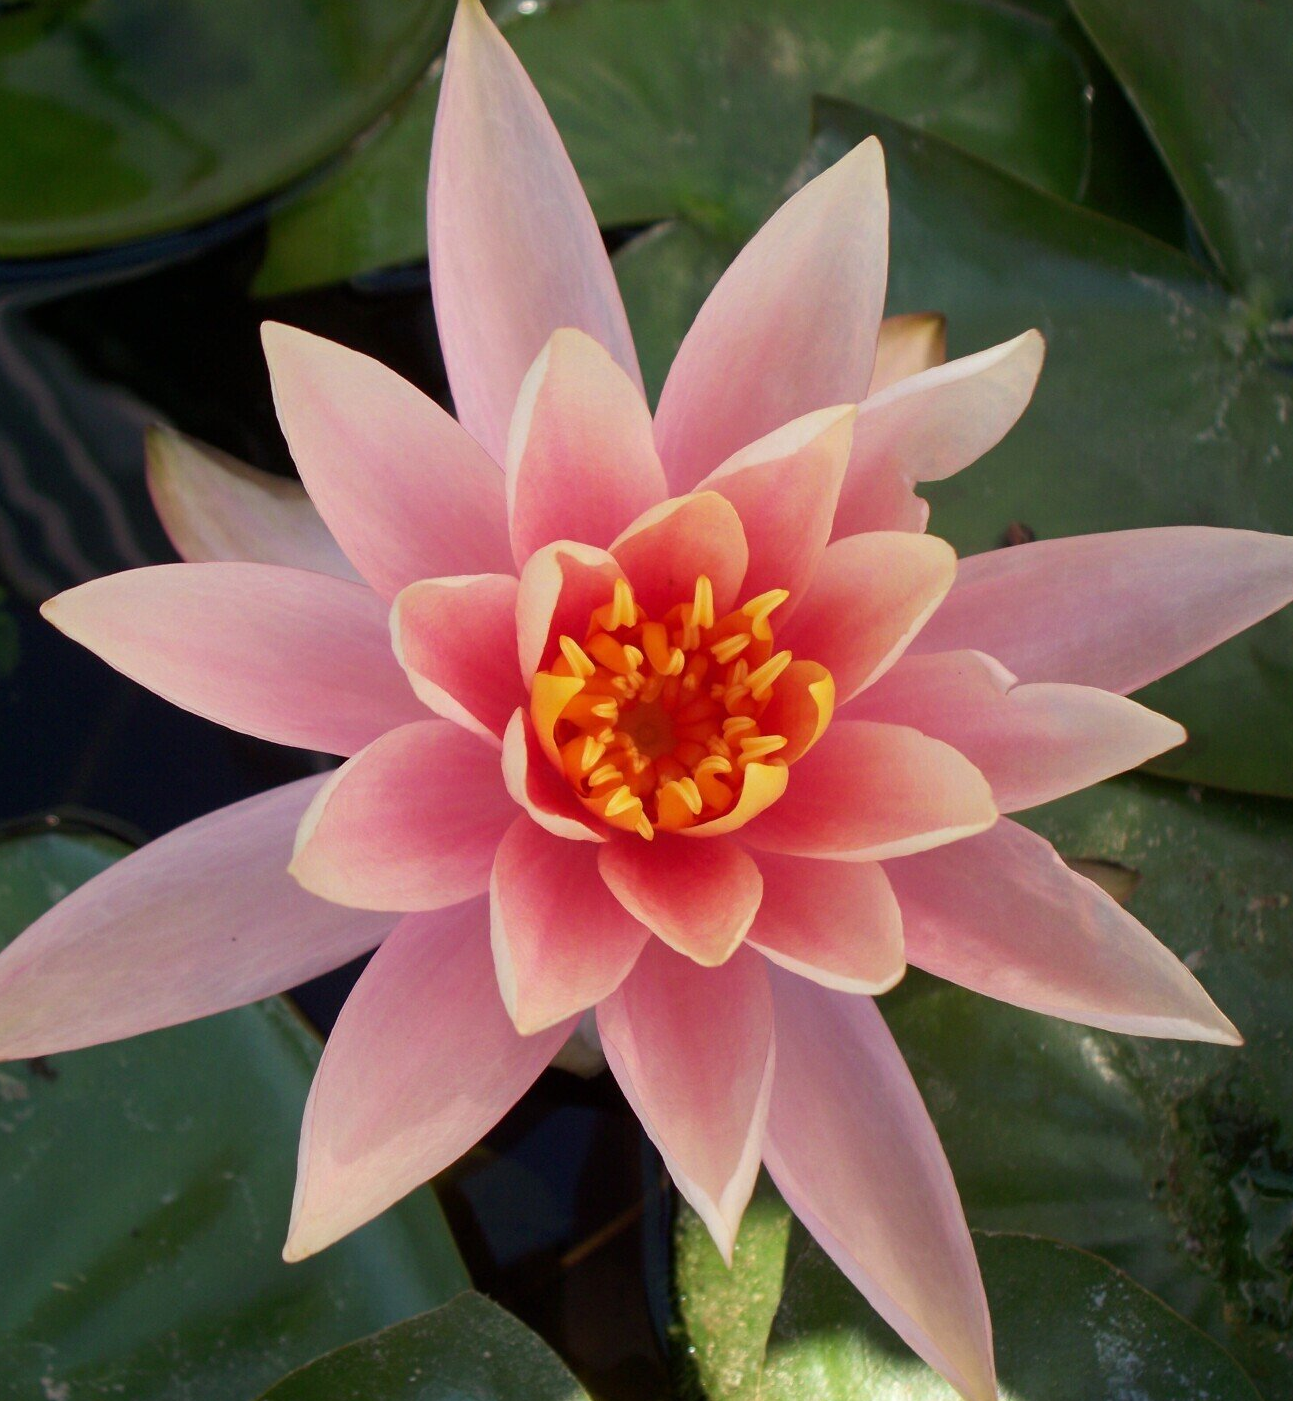 Waterlily & Pond Plants for sale in Lebanon PA